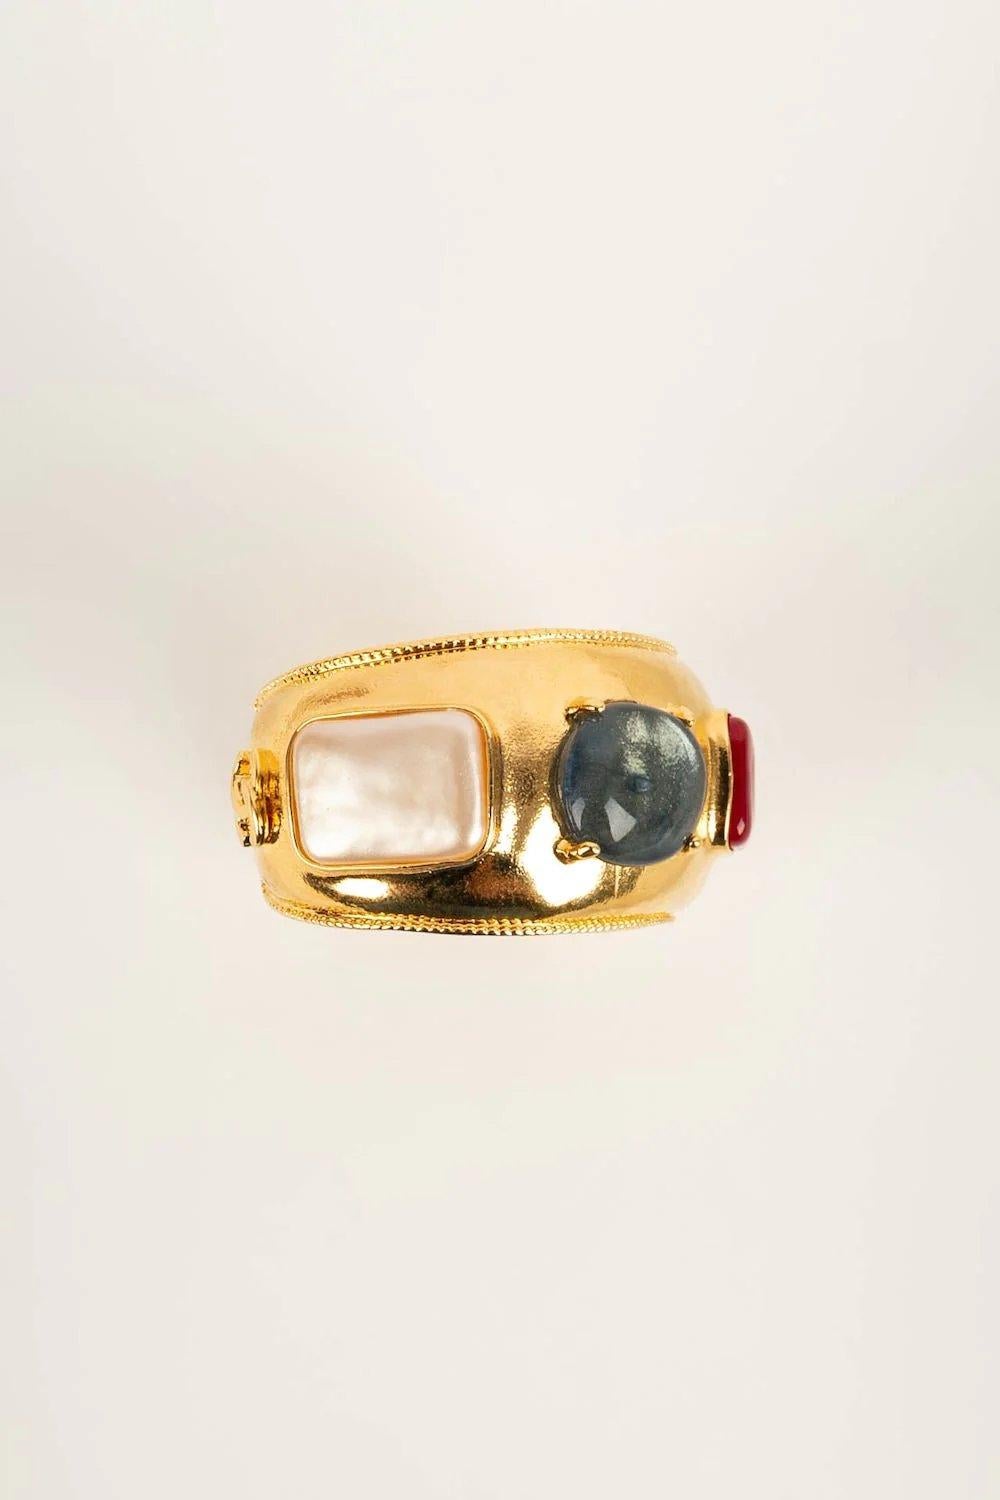 Women's Chanel Cuff in Gilded Metal and Black Glass Paste, 1997 For Sale